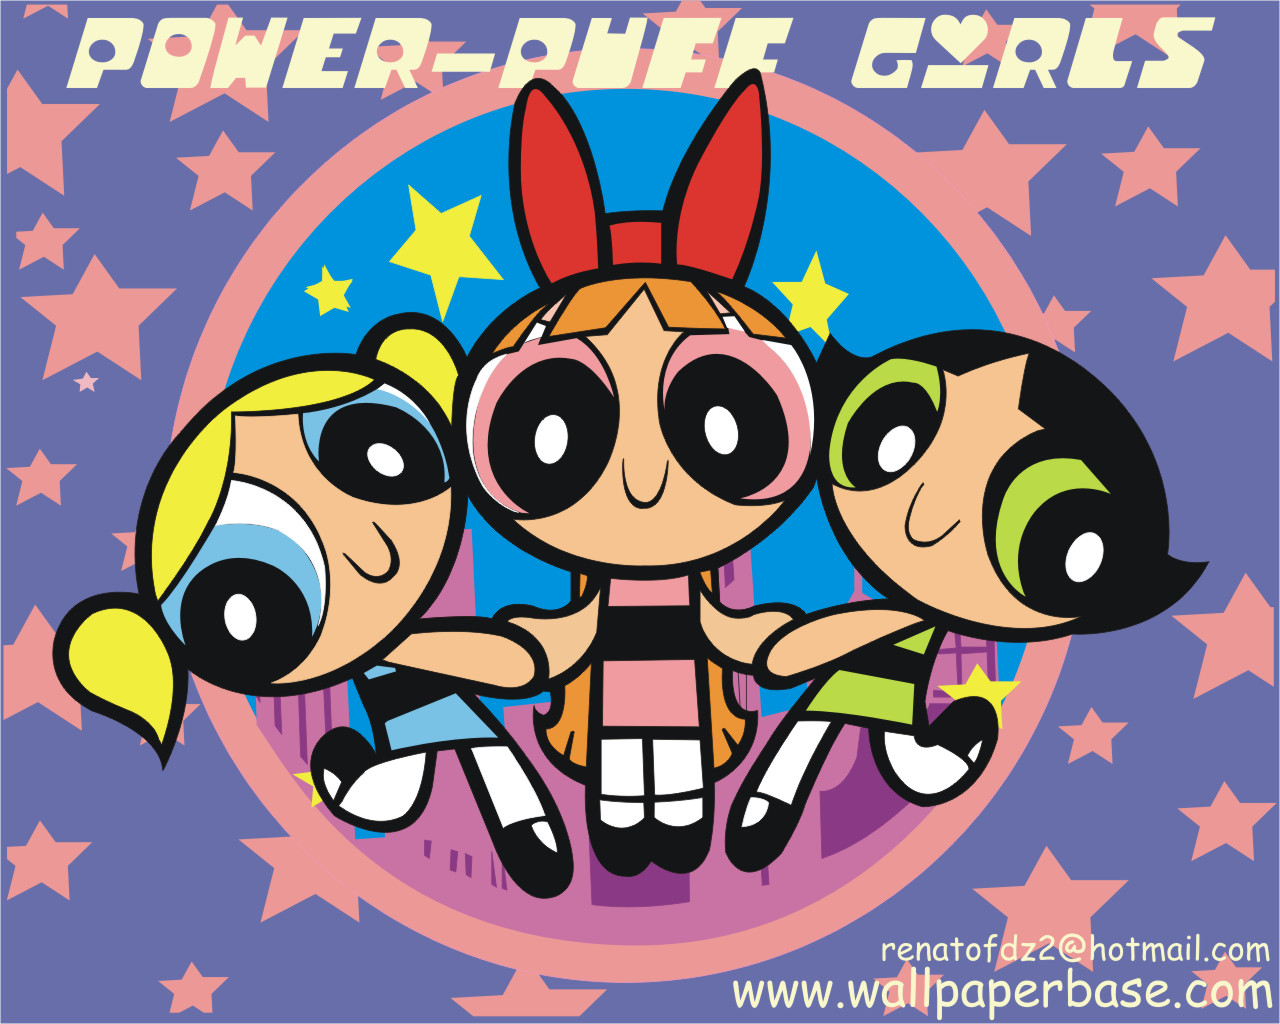 Grrrl Punch: ”The Powerpuff Girls” Empowering Show For Pre Teen Kids. Ruby Soup With Pearl Juice